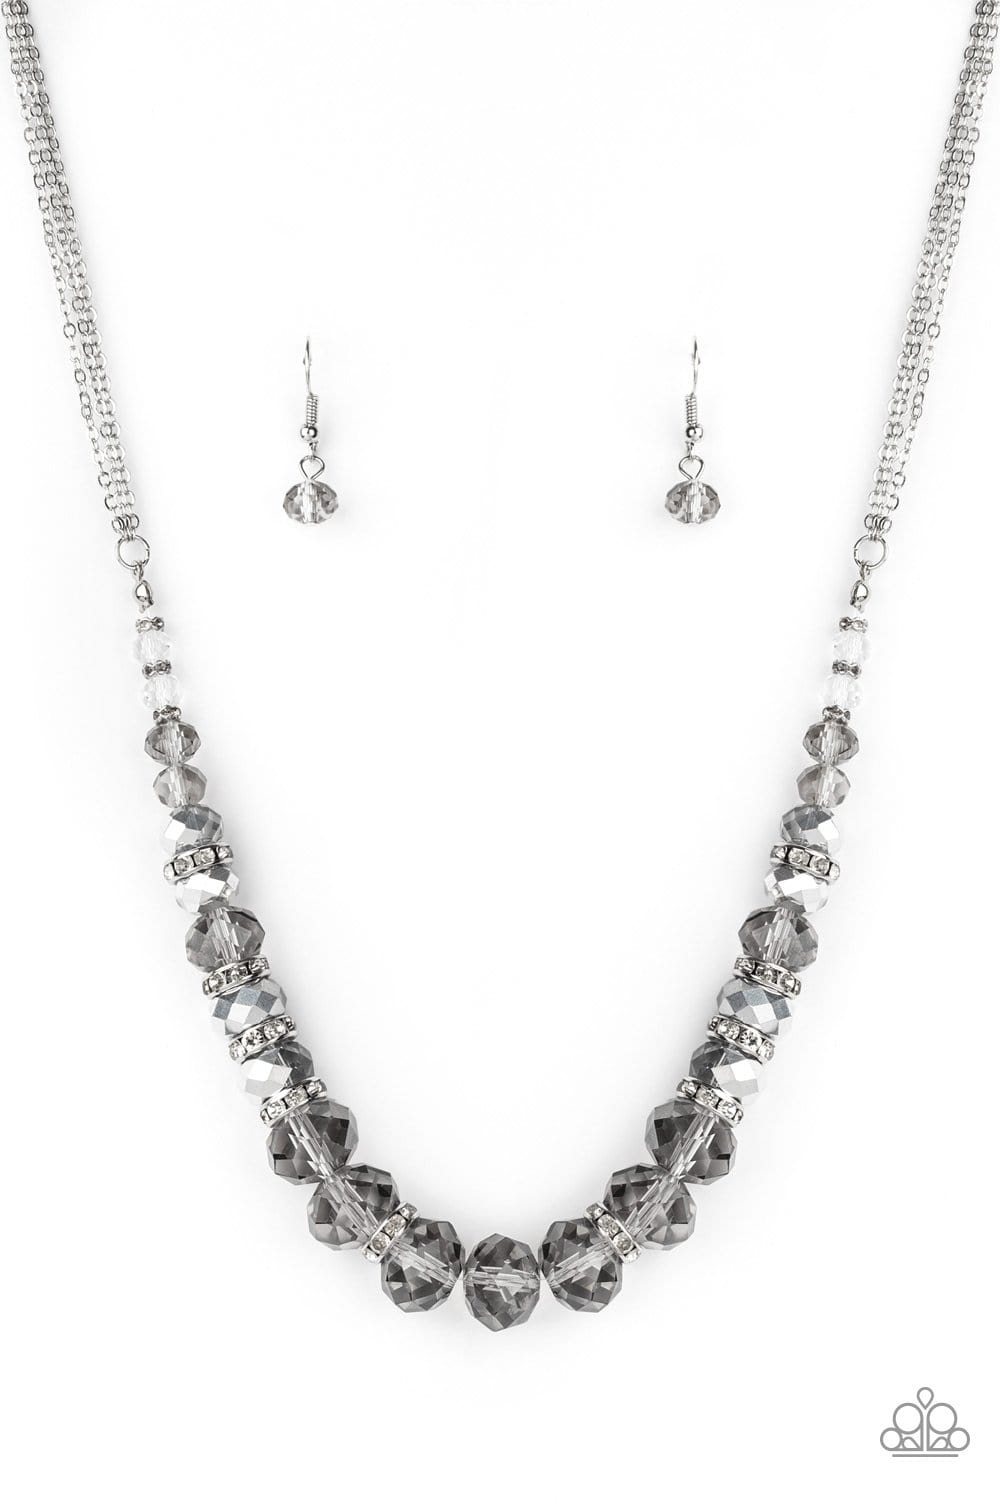 Paparazzi: Distracted by Dazzle - Silver Necklace - Jewels N’ Thingz Boutique